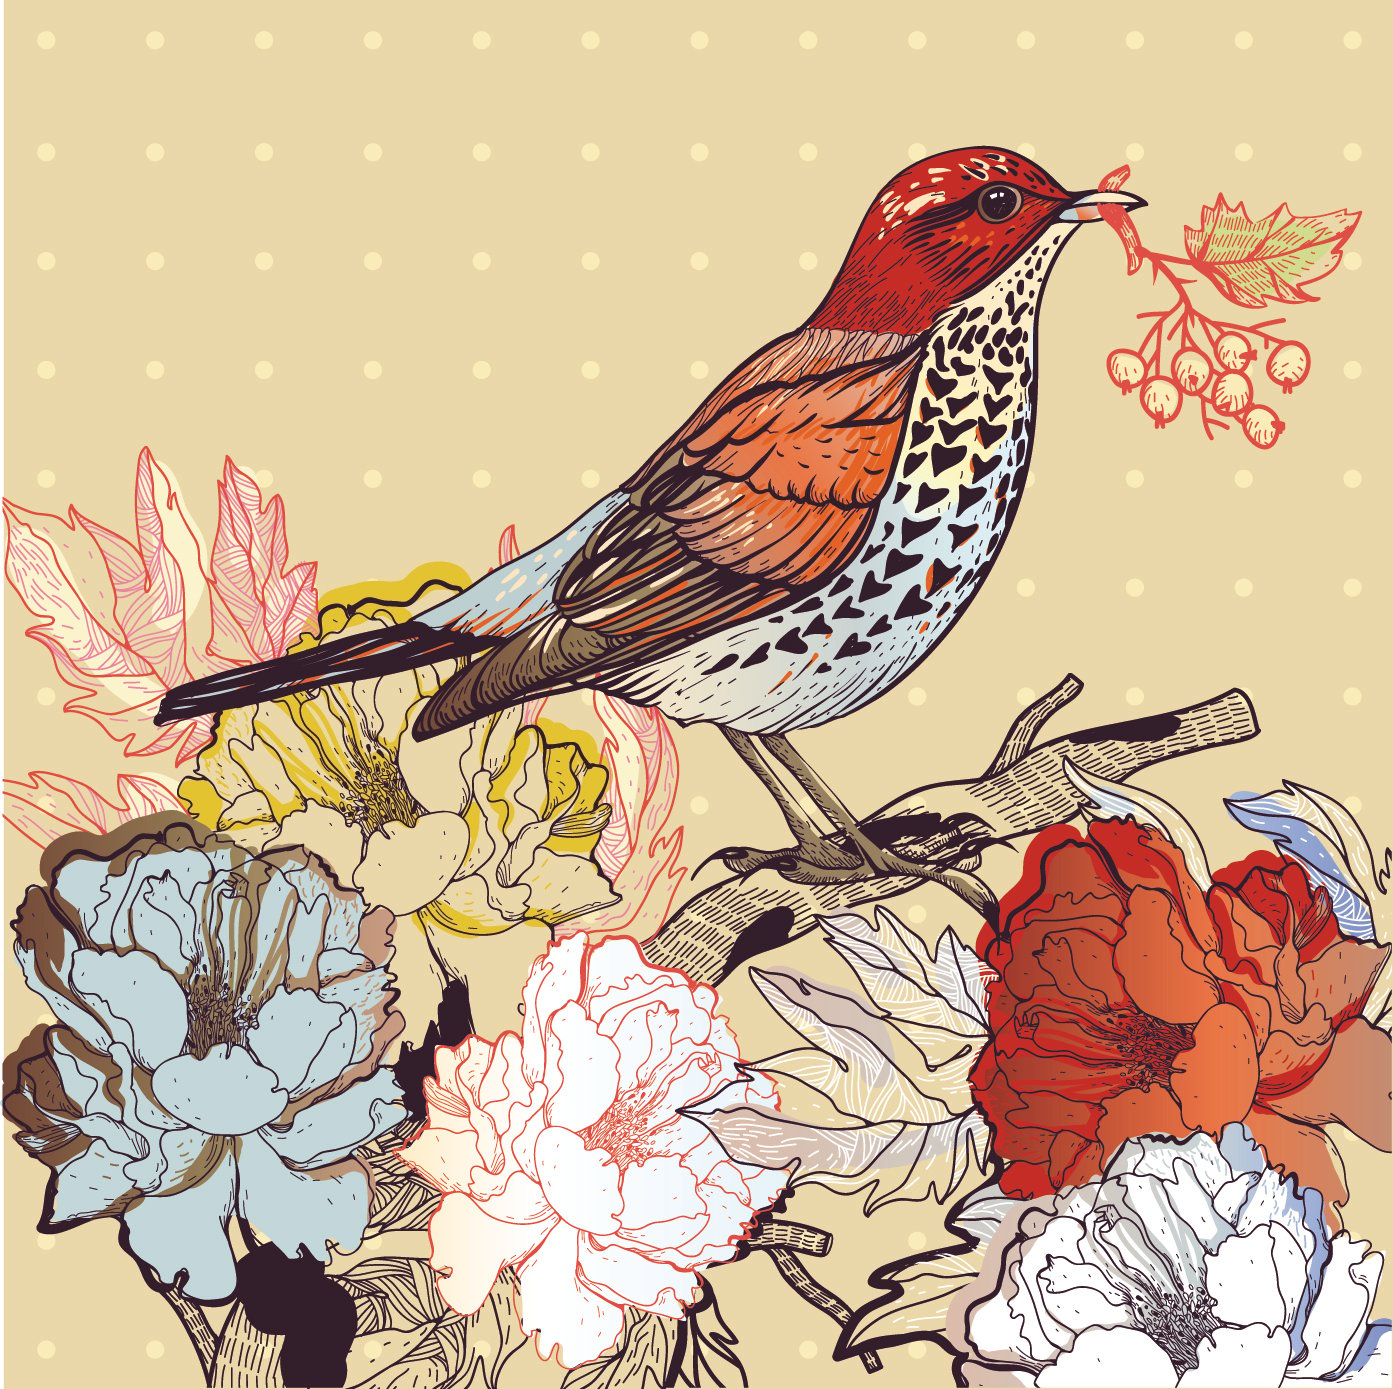  birds vector 07 download name hand drawn floral backgrounds with birds